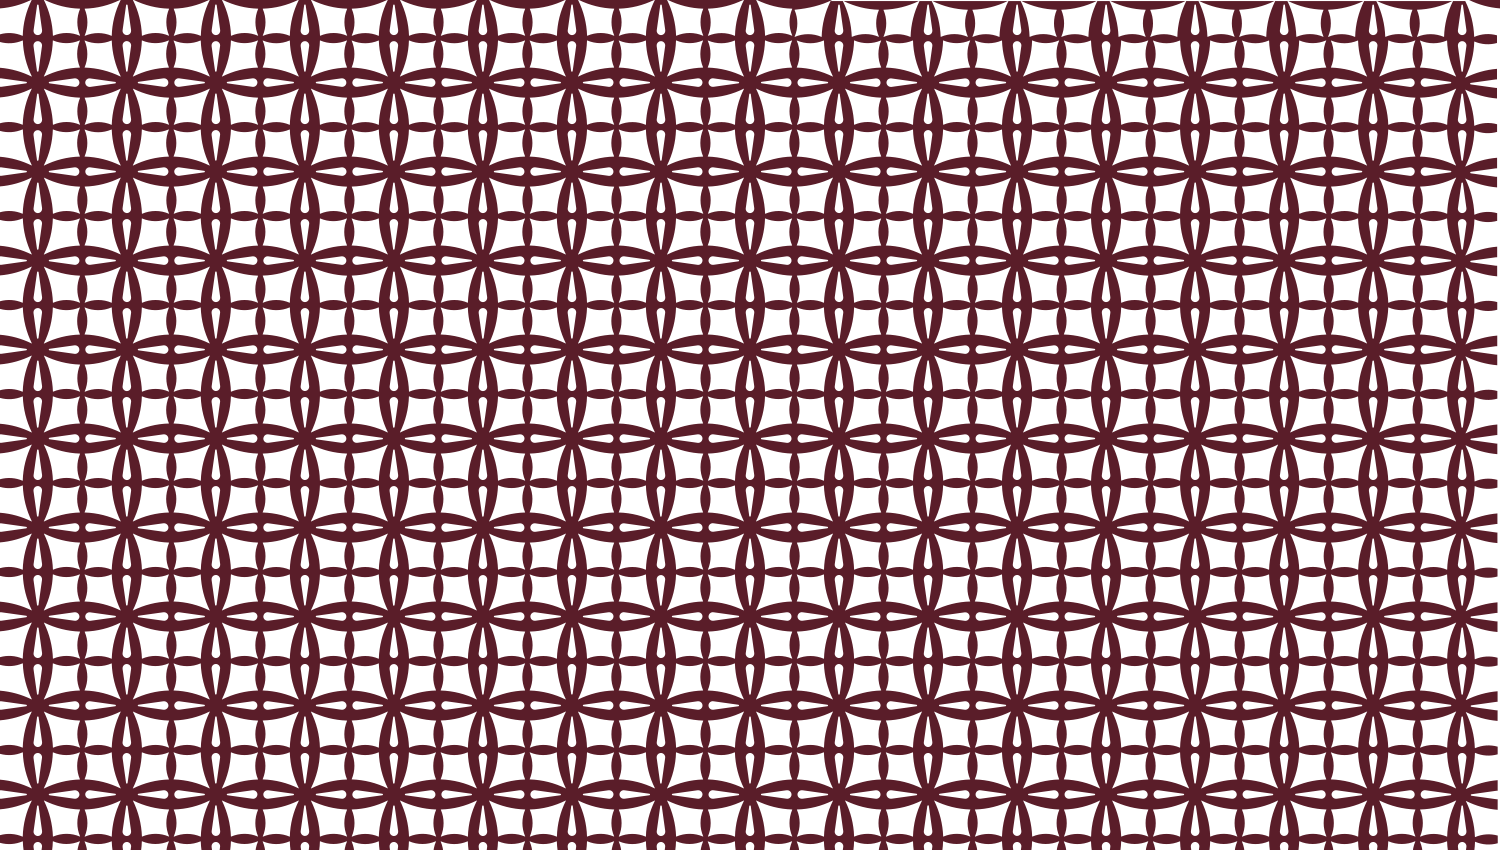 Parasoleil™ Fox River© pattern displayed with a burgundy color overlay